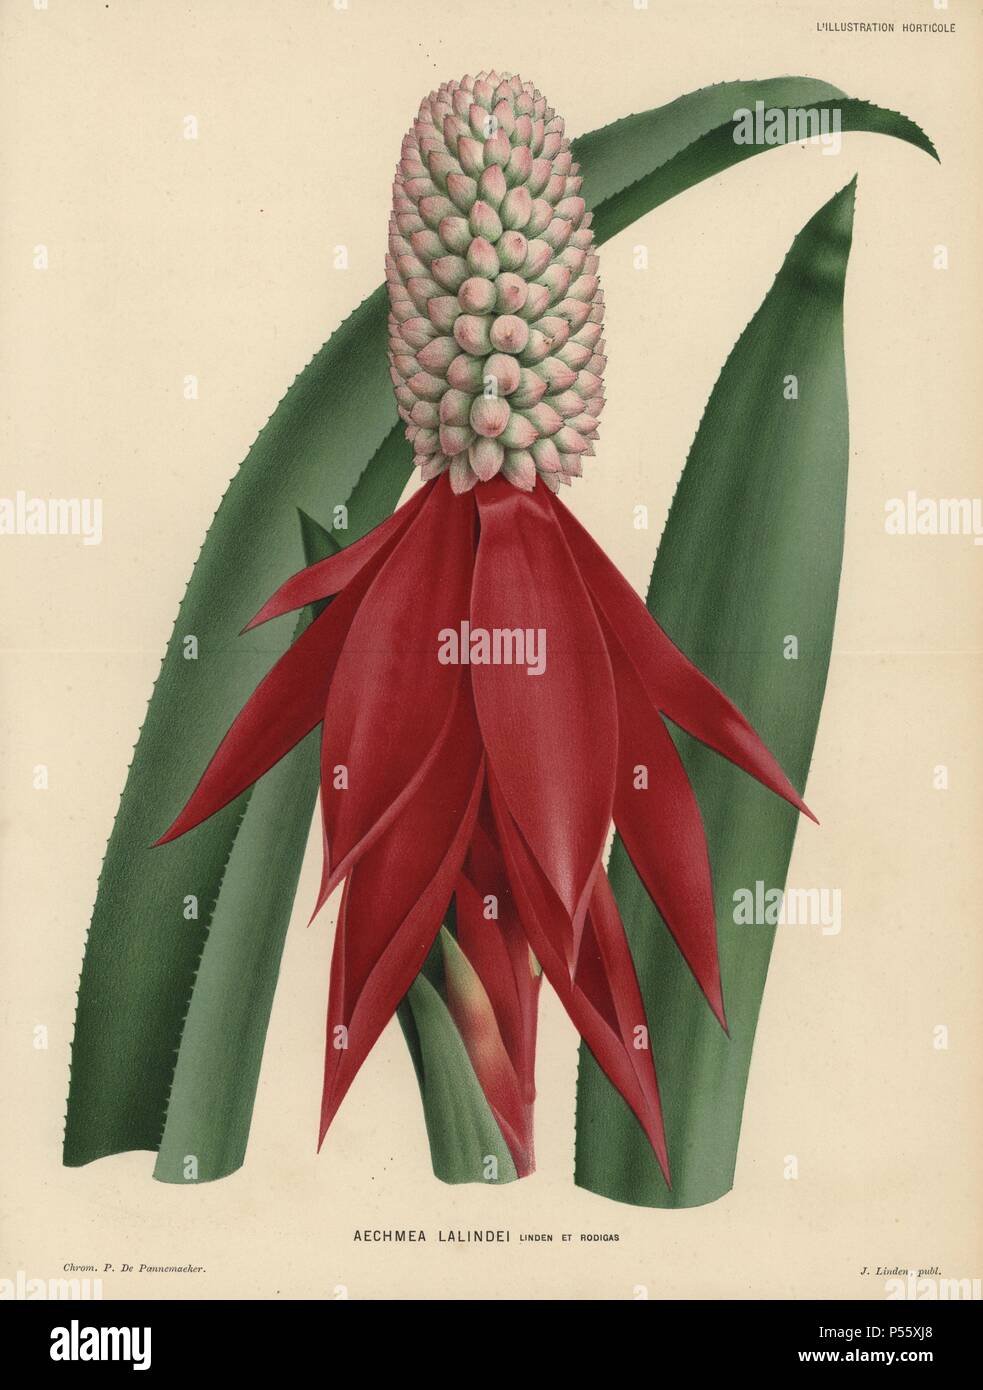 Aechmea succulent plant with spear-shaped crimson flower. Aechmea lalindei Linden et Rodigas. Chromolithograph drawn by P. de Pannemaeker, for Jean Linden's 'L'Illustration Horticole' published in Ghent in 1886. Jean Linden (1817-1898) was a Belgian explorer, horticulturist, scientist and publisher of botanical books. Stock Photo